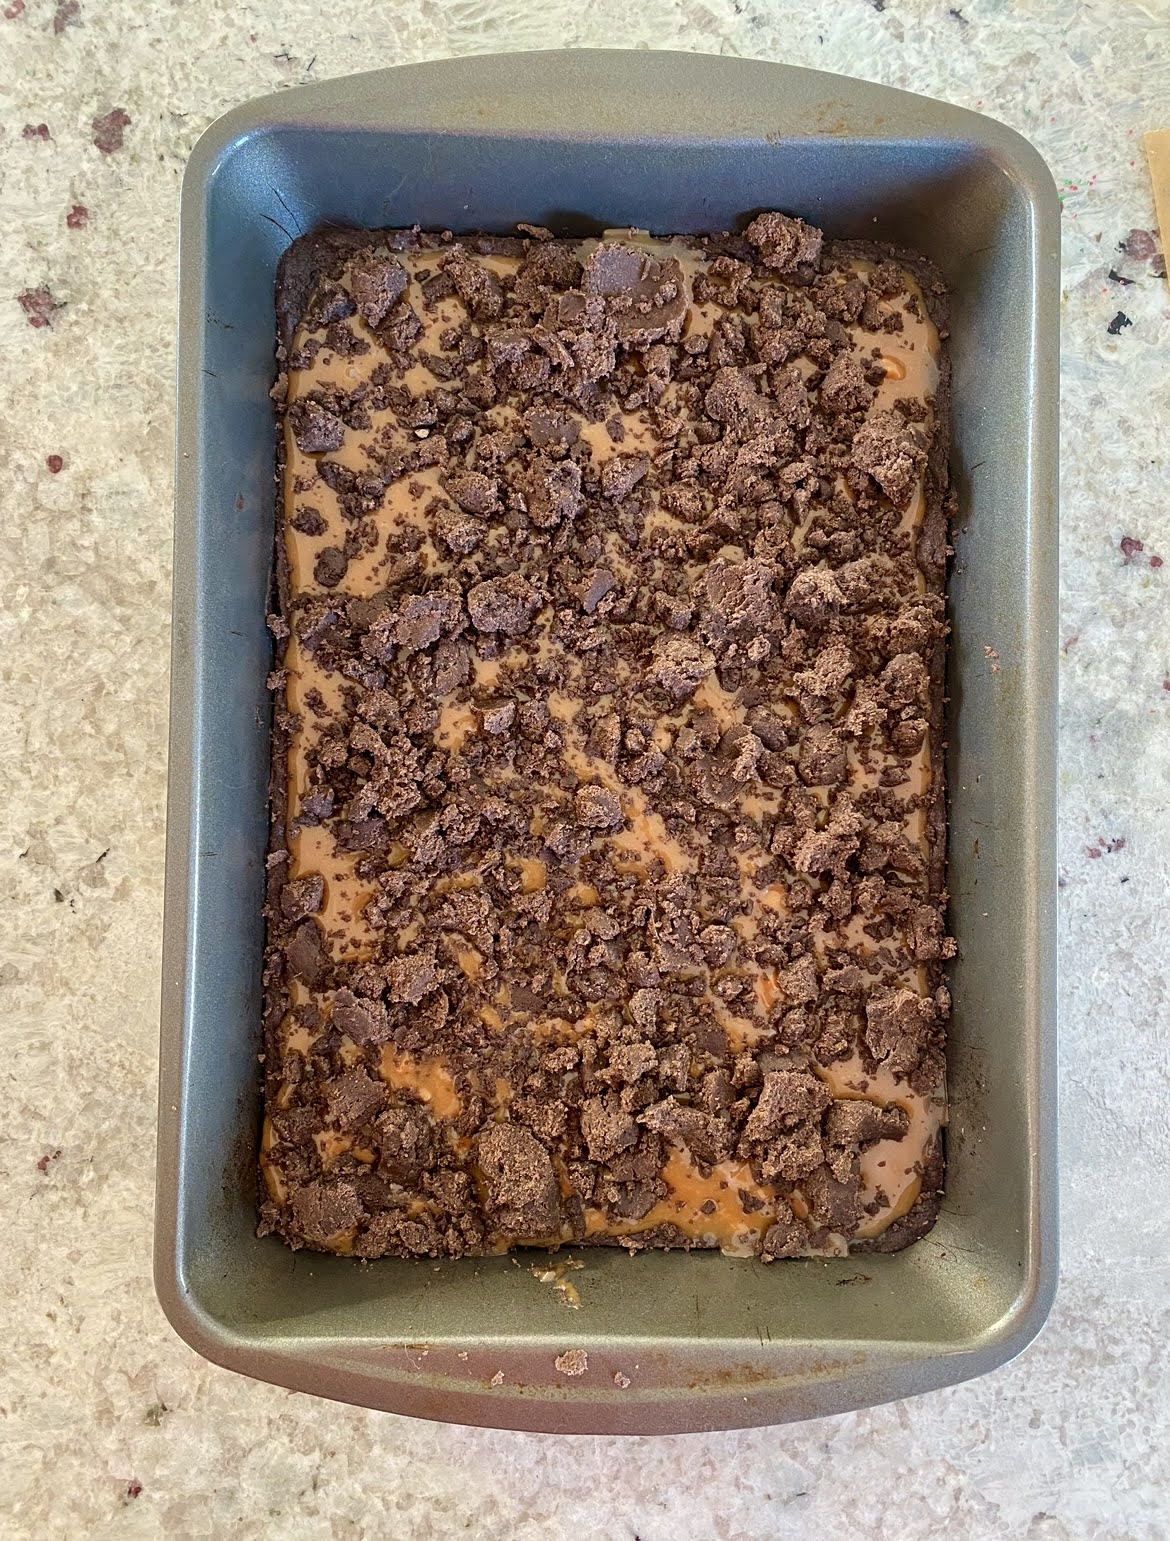 the remaining chocolate dough sprinkled over the caramel layer in a baking pan